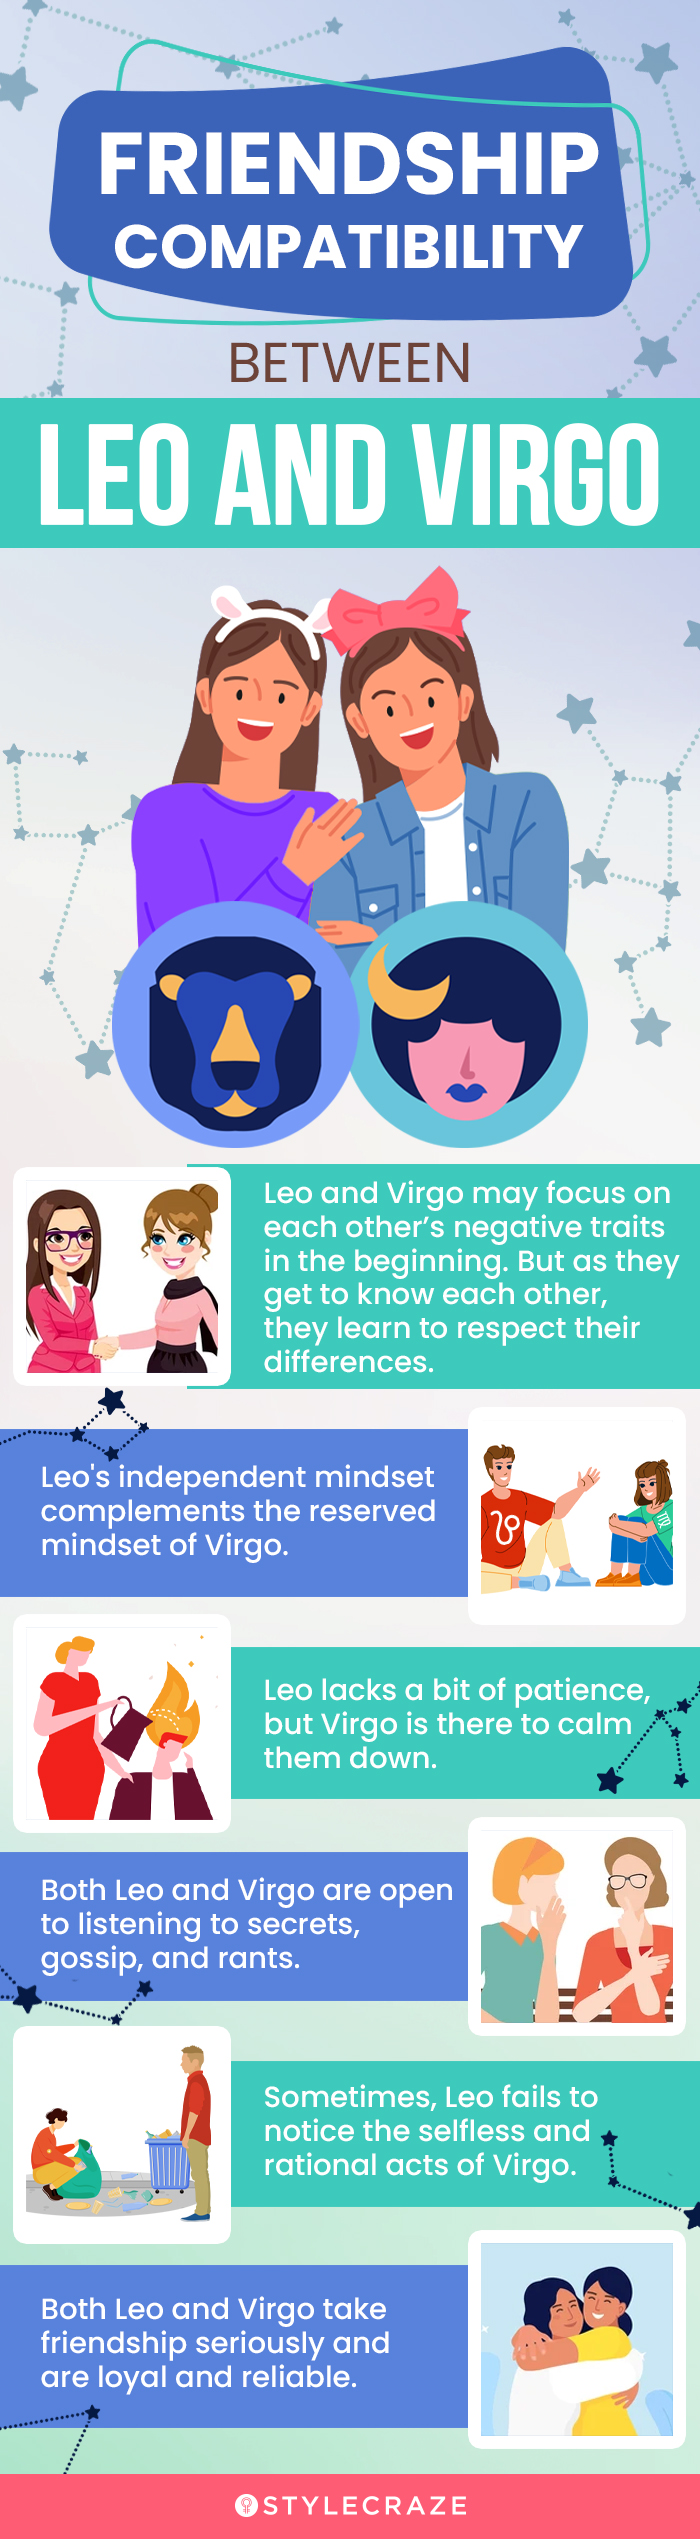 friendship compatibility points between leo and virgo signs (infographic)